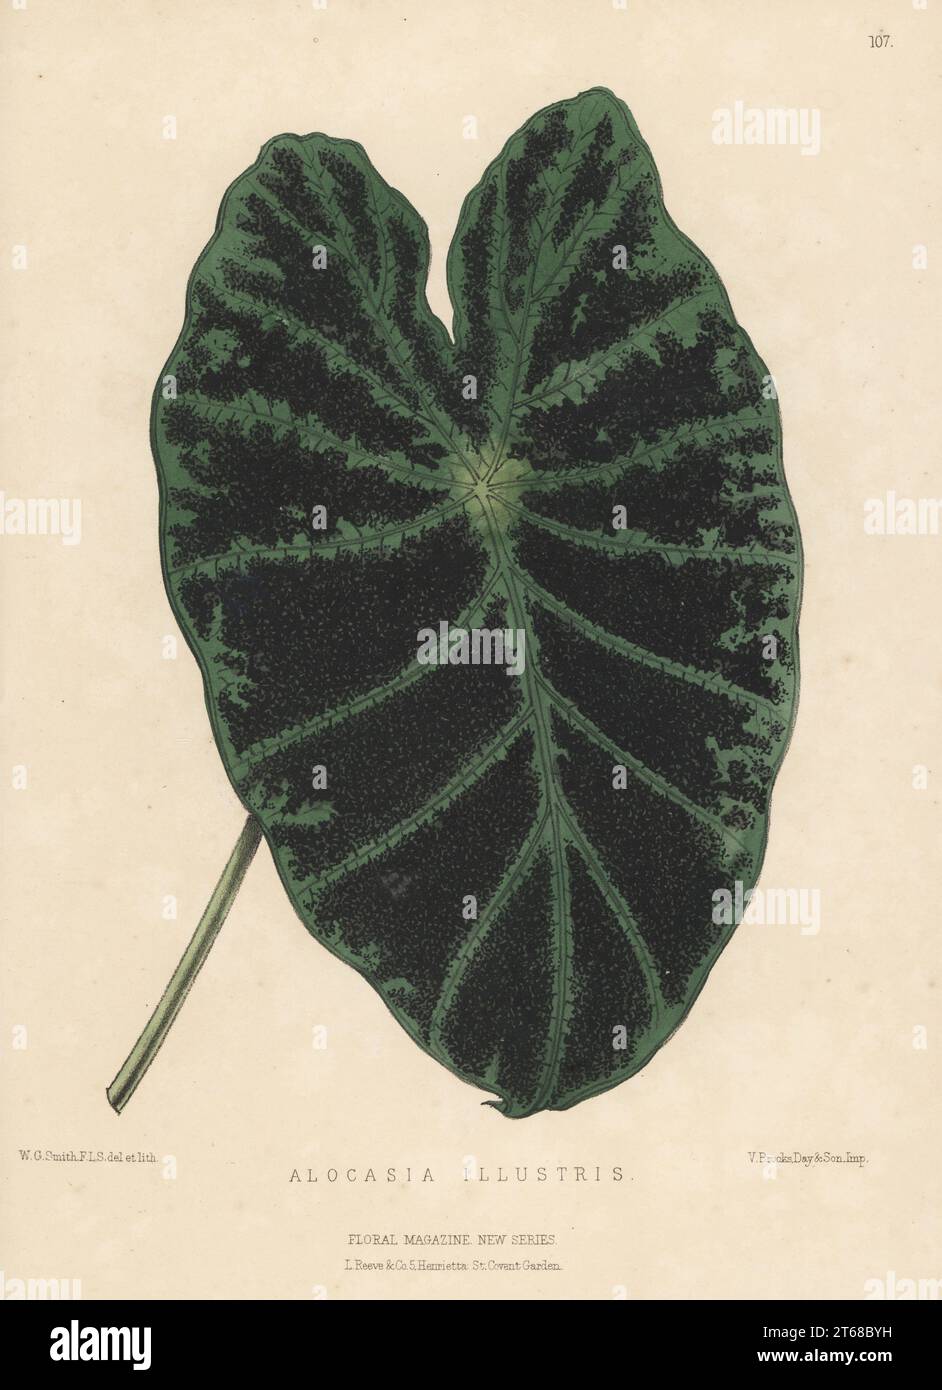 Taro, Colocasia esculenta. Imported from the East Indies by nurseryman William Bull, King's Road, Chelsea. As Alocasia illustris.Handcolored botanical illustration drawn and lithographed by Worthington George Smith from Henry Honywood Dombrain's Floral Magazine, New Series, Volume 3, L. Reeve, London, 1874. Lithograph printed by Vincent Brooks, Day & Son. Stock Photo